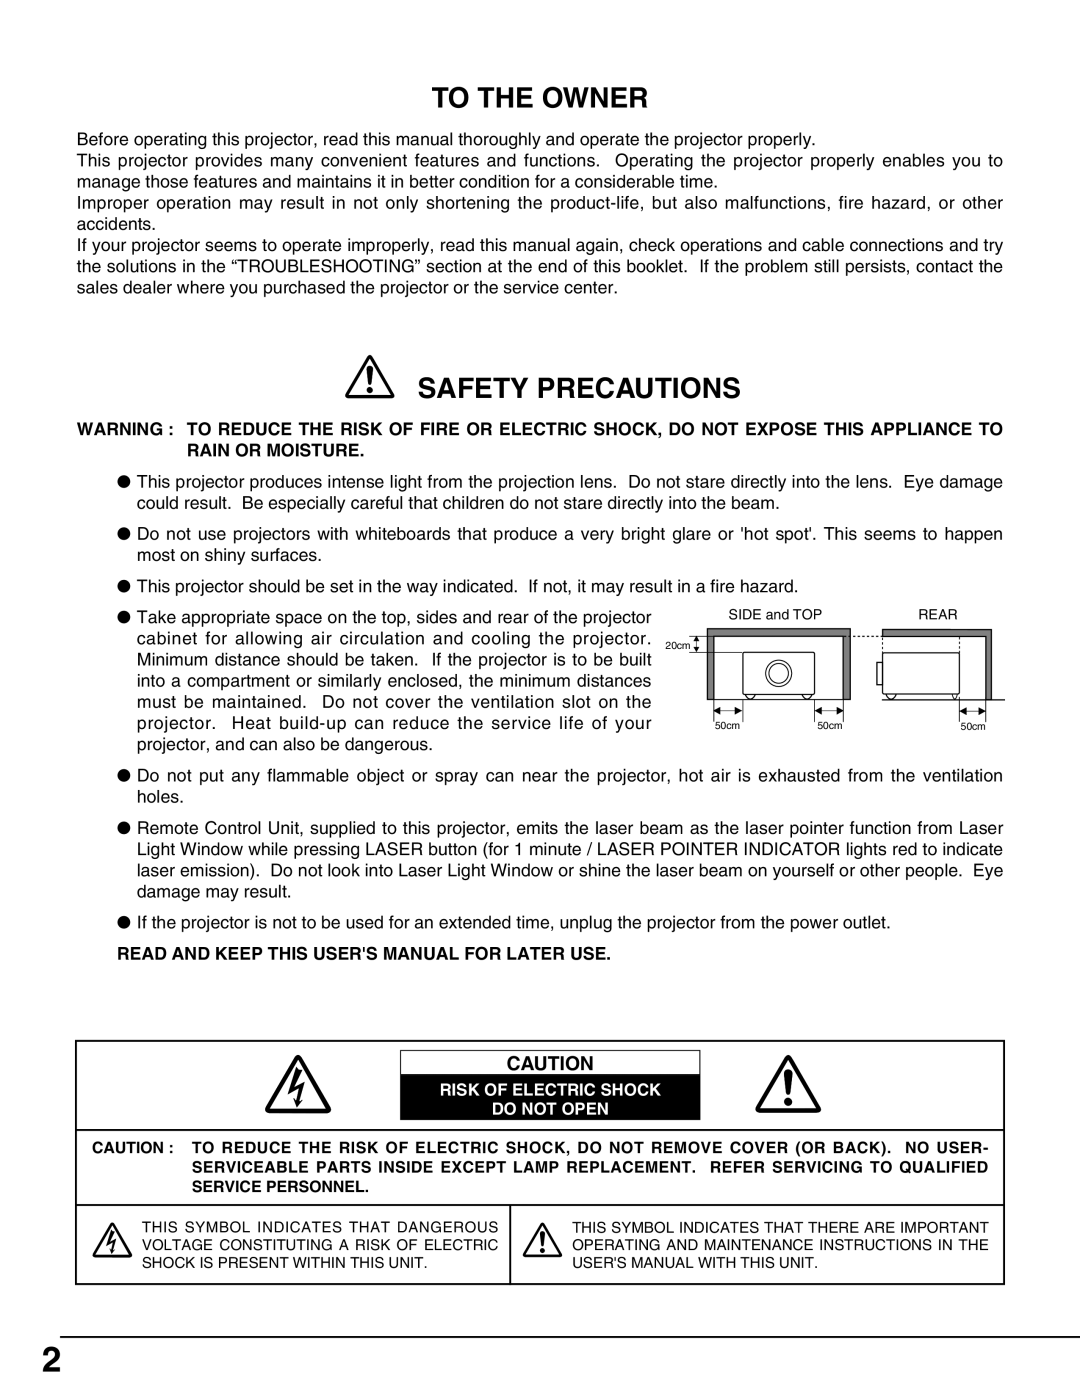 Christie Digital Systems 38-VIV207-01 To The Owner, Safety Precautions, Read And Keep This Users Manual For Later Use 